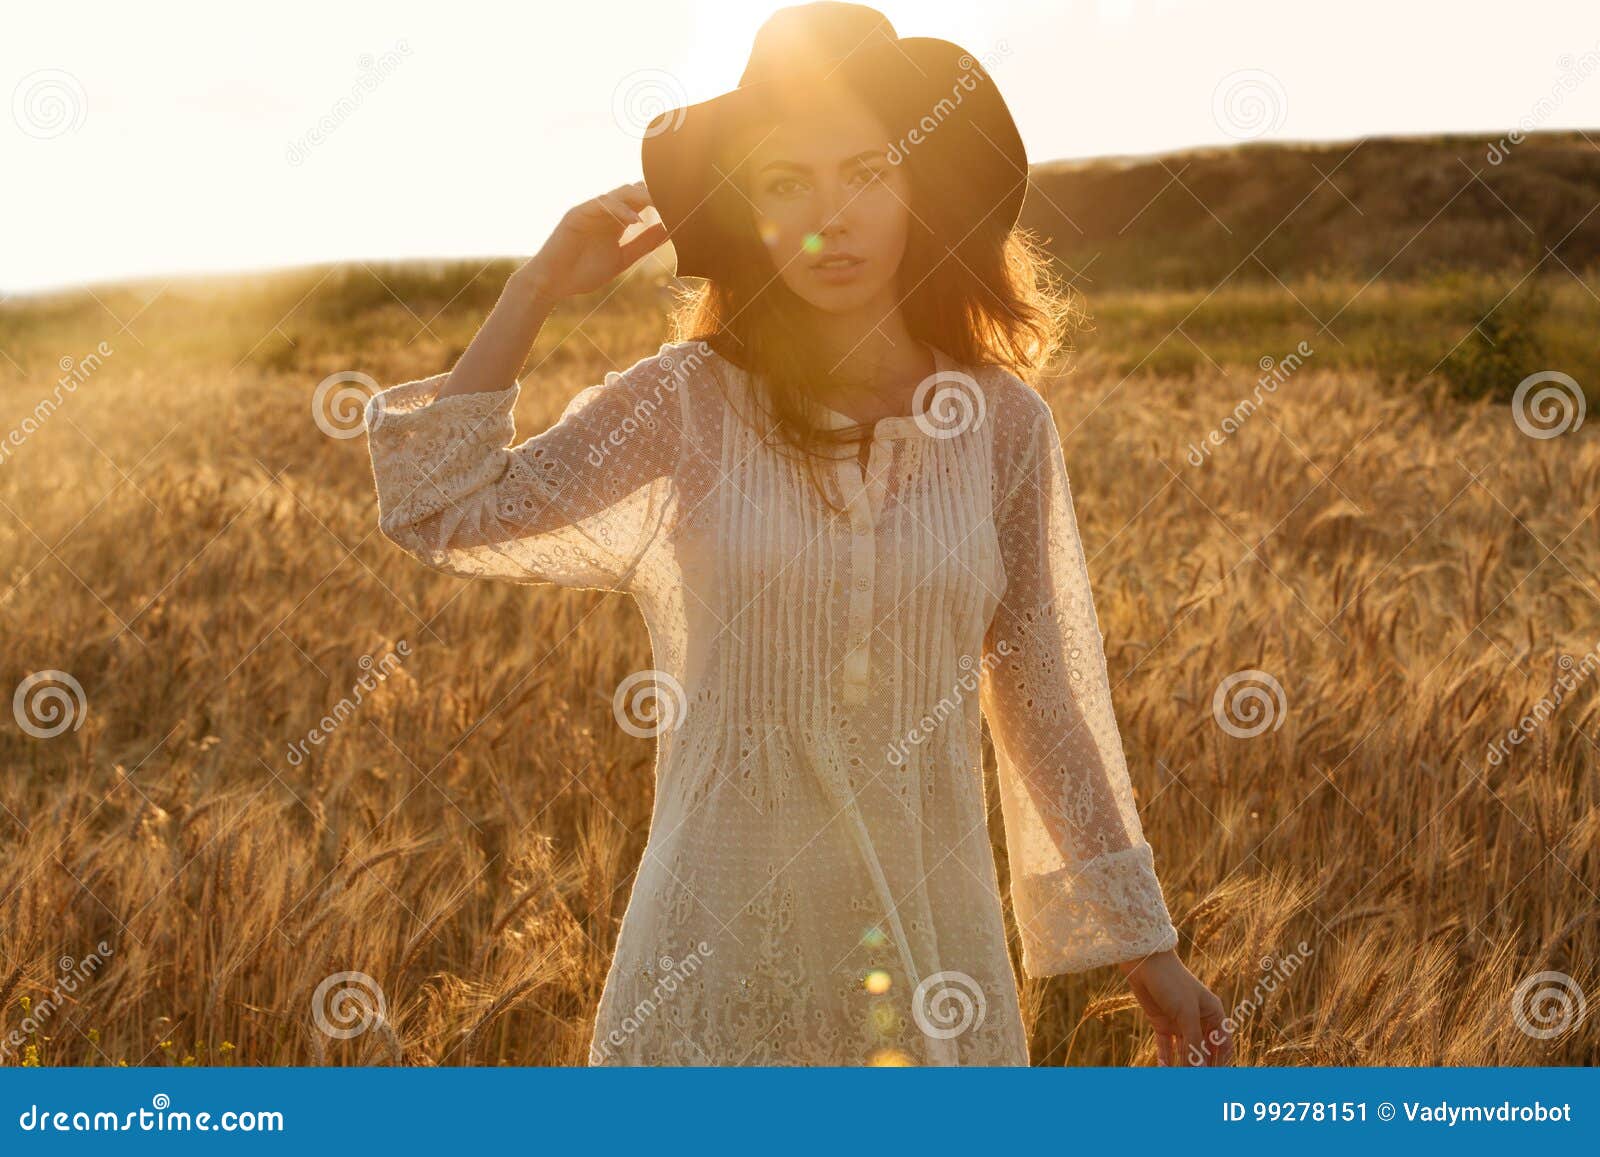 Beautiful Young Woman Standing in the Field Stock Image - Image of ...